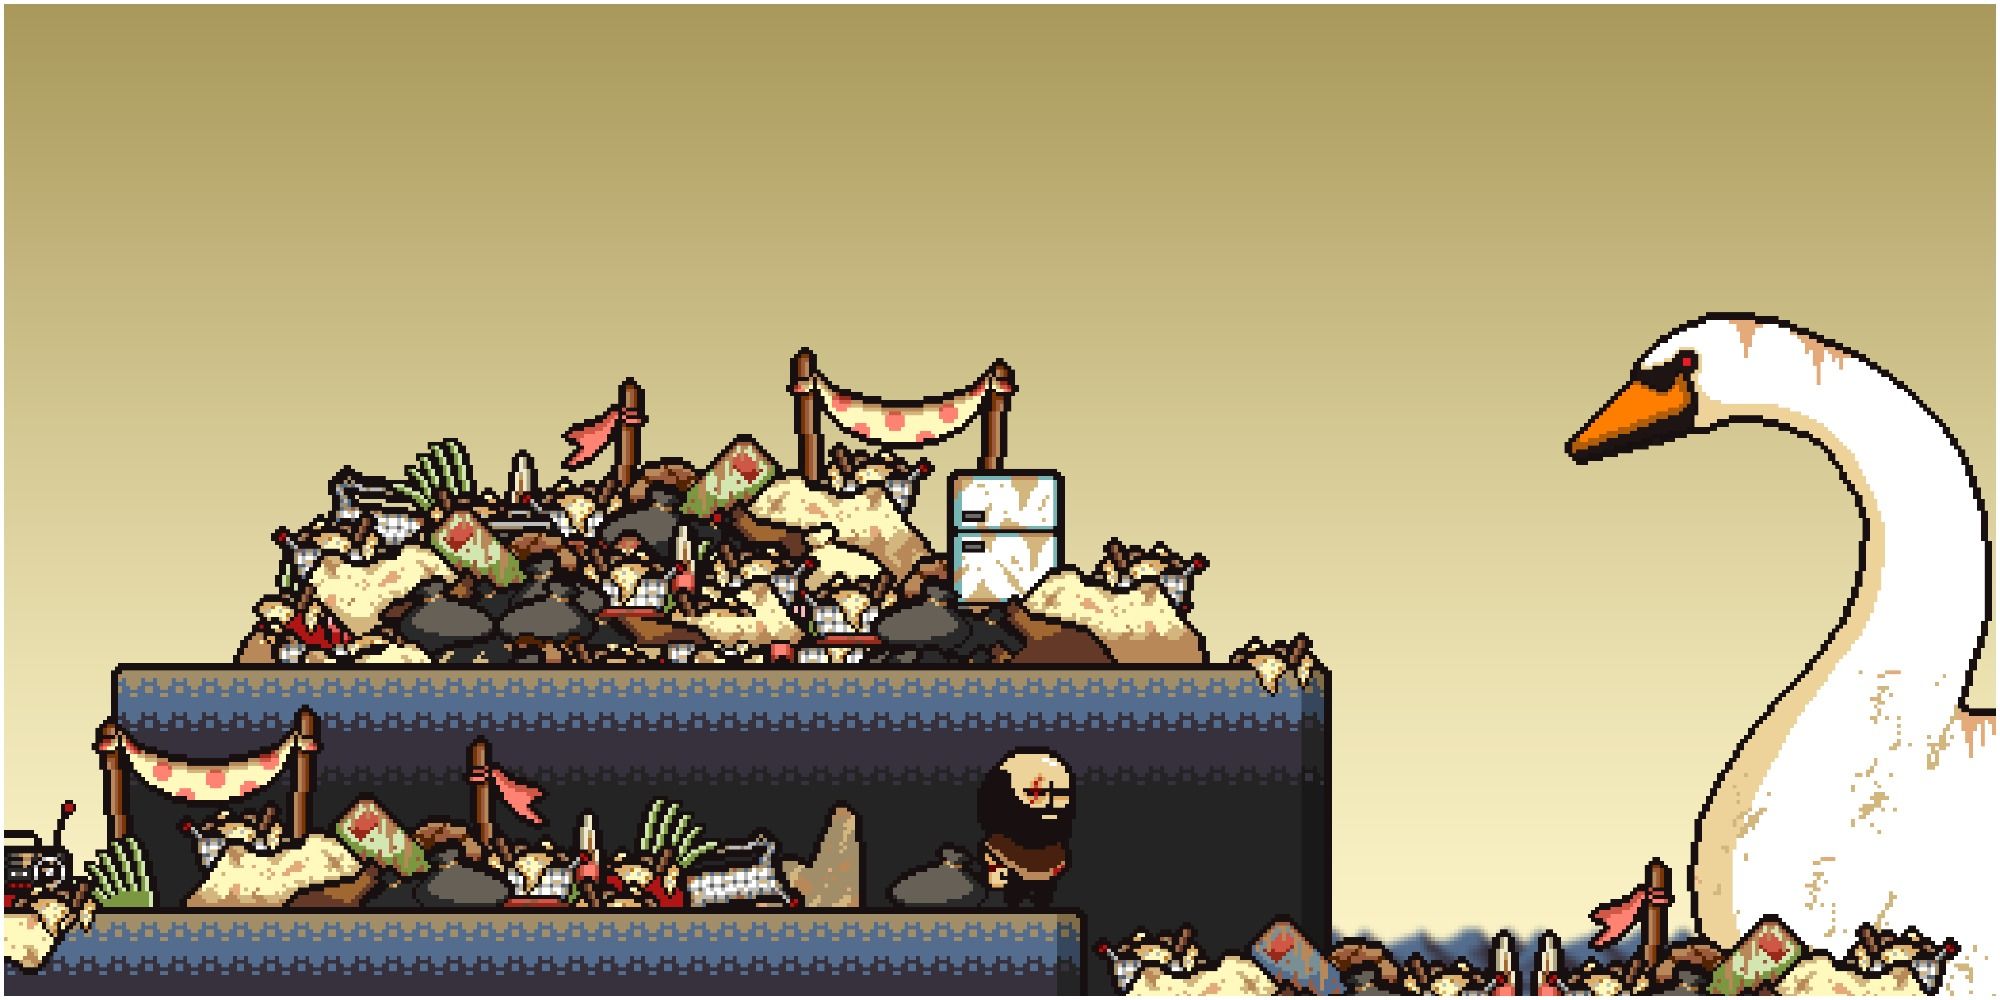 A screenshot from Lisa the Painful where the main character encounters a giant swan